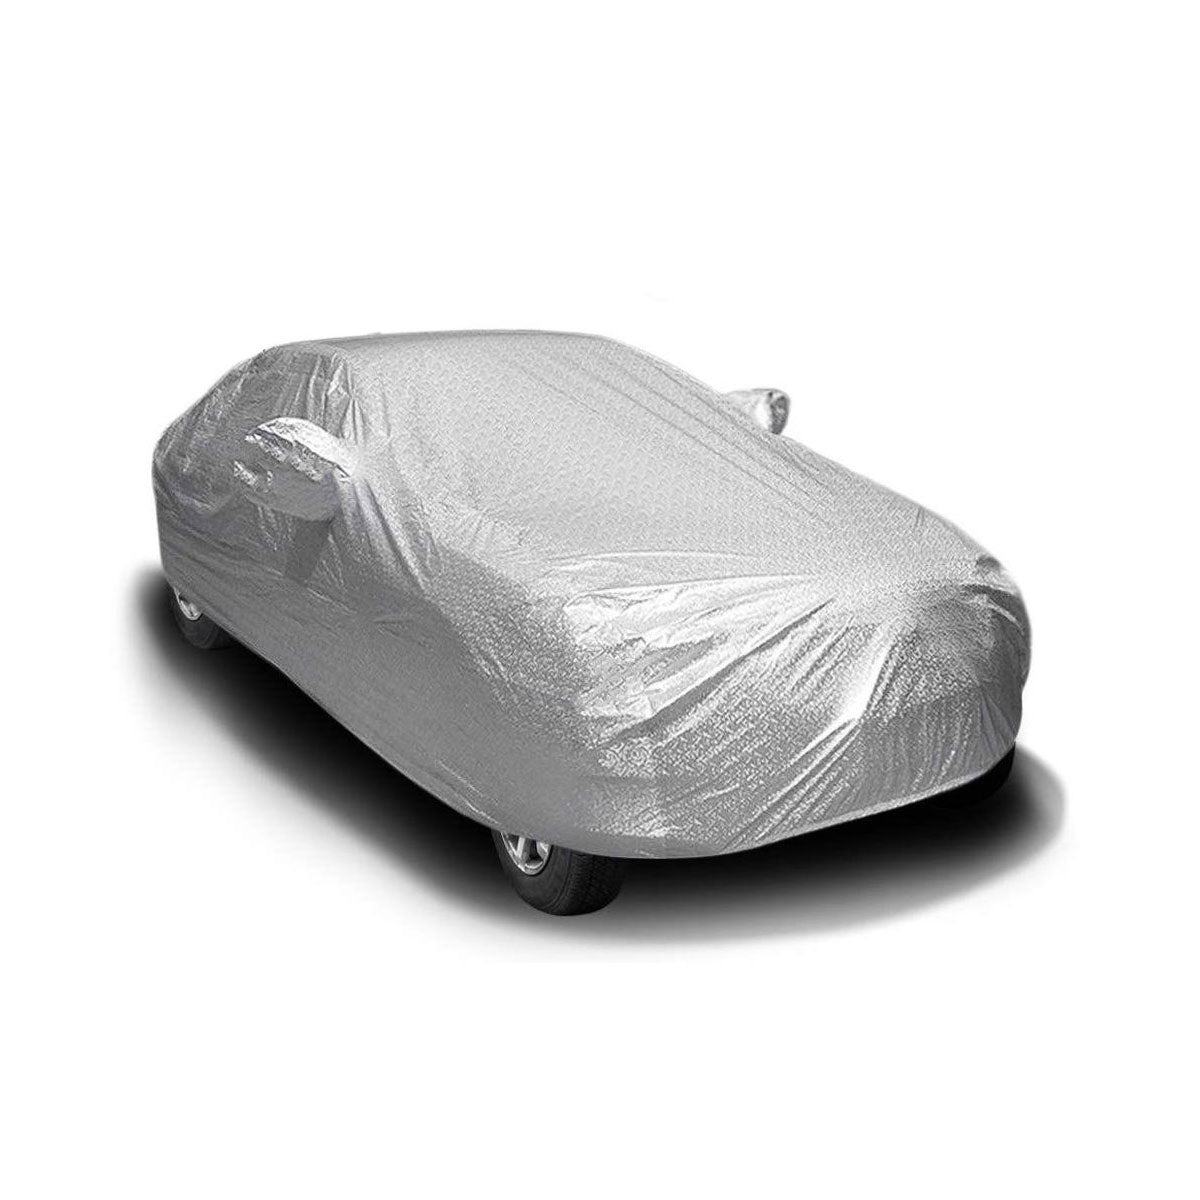 Oshotto Spyro Silver Anti Reflective, dustproof and Water Proof Car Body Cover with Mirror Pockets For Mitsubishi Lancer/Cedia